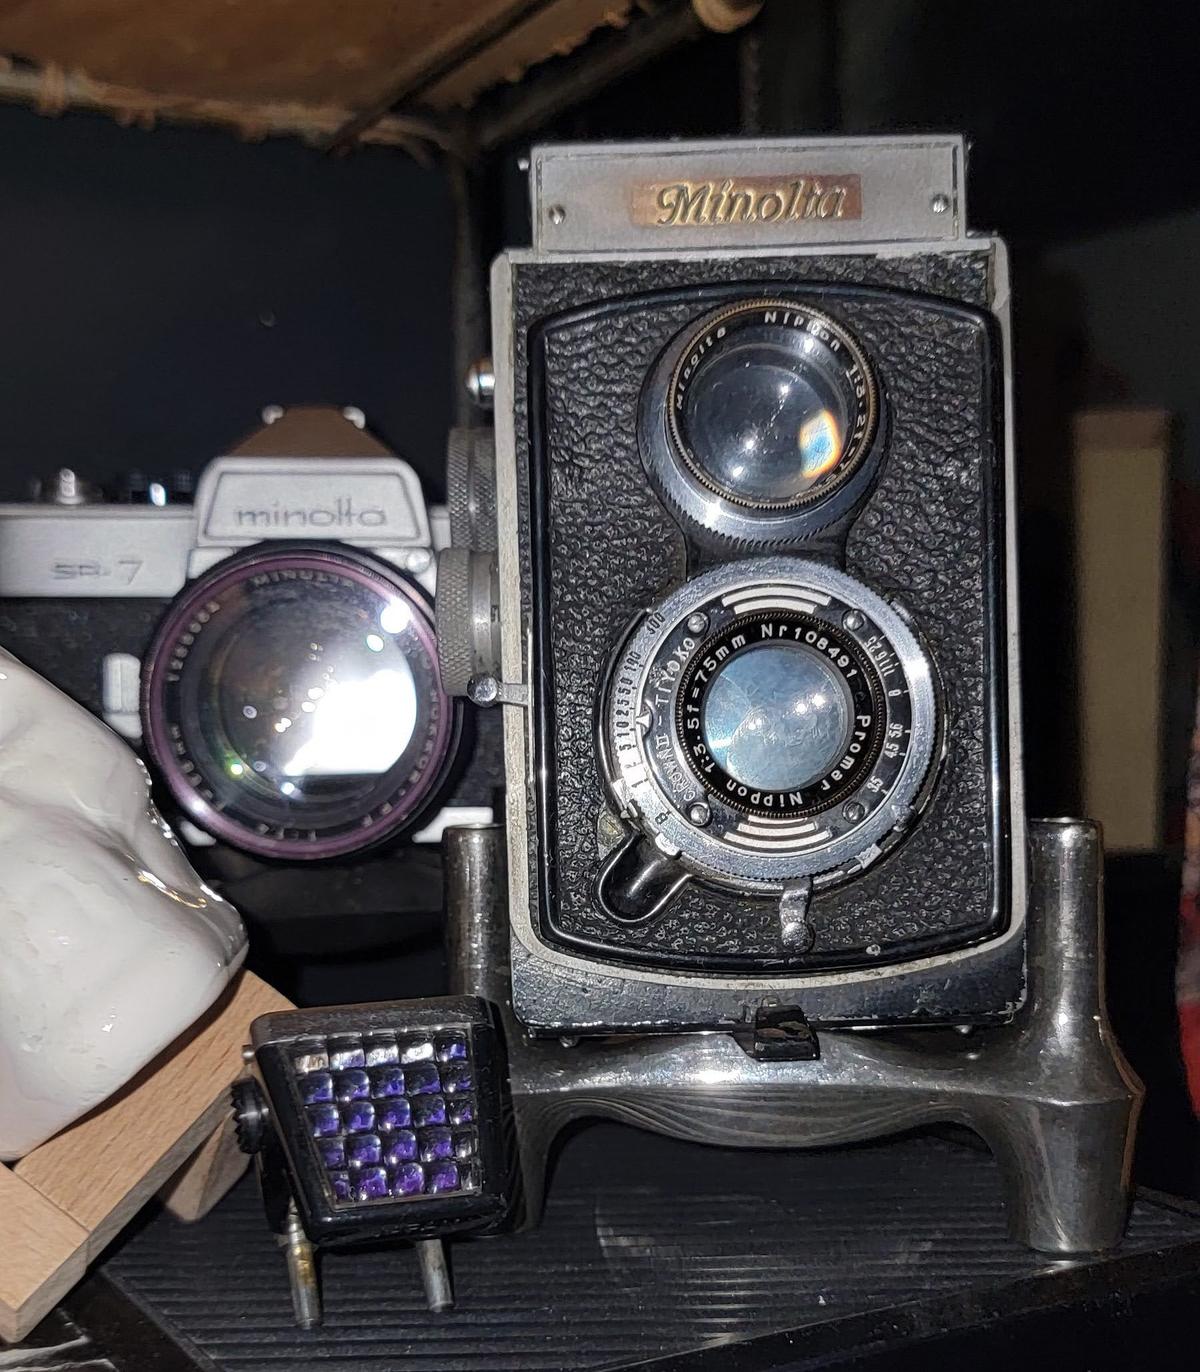 A Minoltaflex 1 camera, probably the oldest in the collection. (Courtesy of Fridrik)